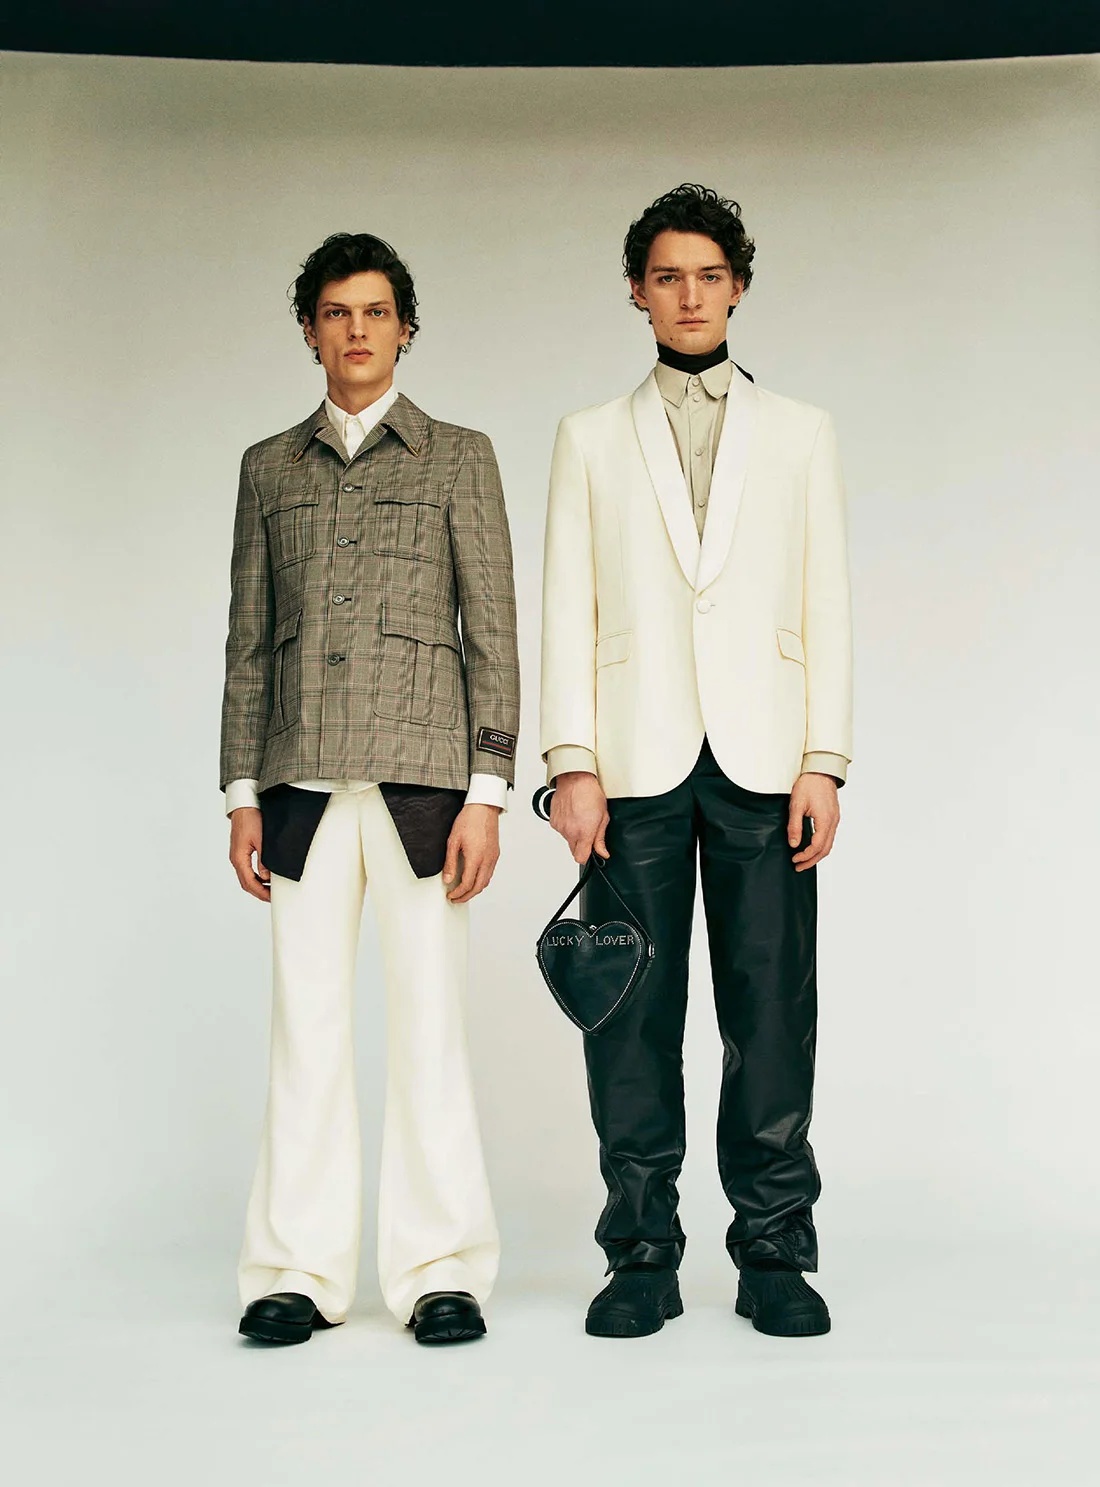 Valentin Caron and Otto Lotz by Edd Horder for The Sunday Times Style March 20th, 2022